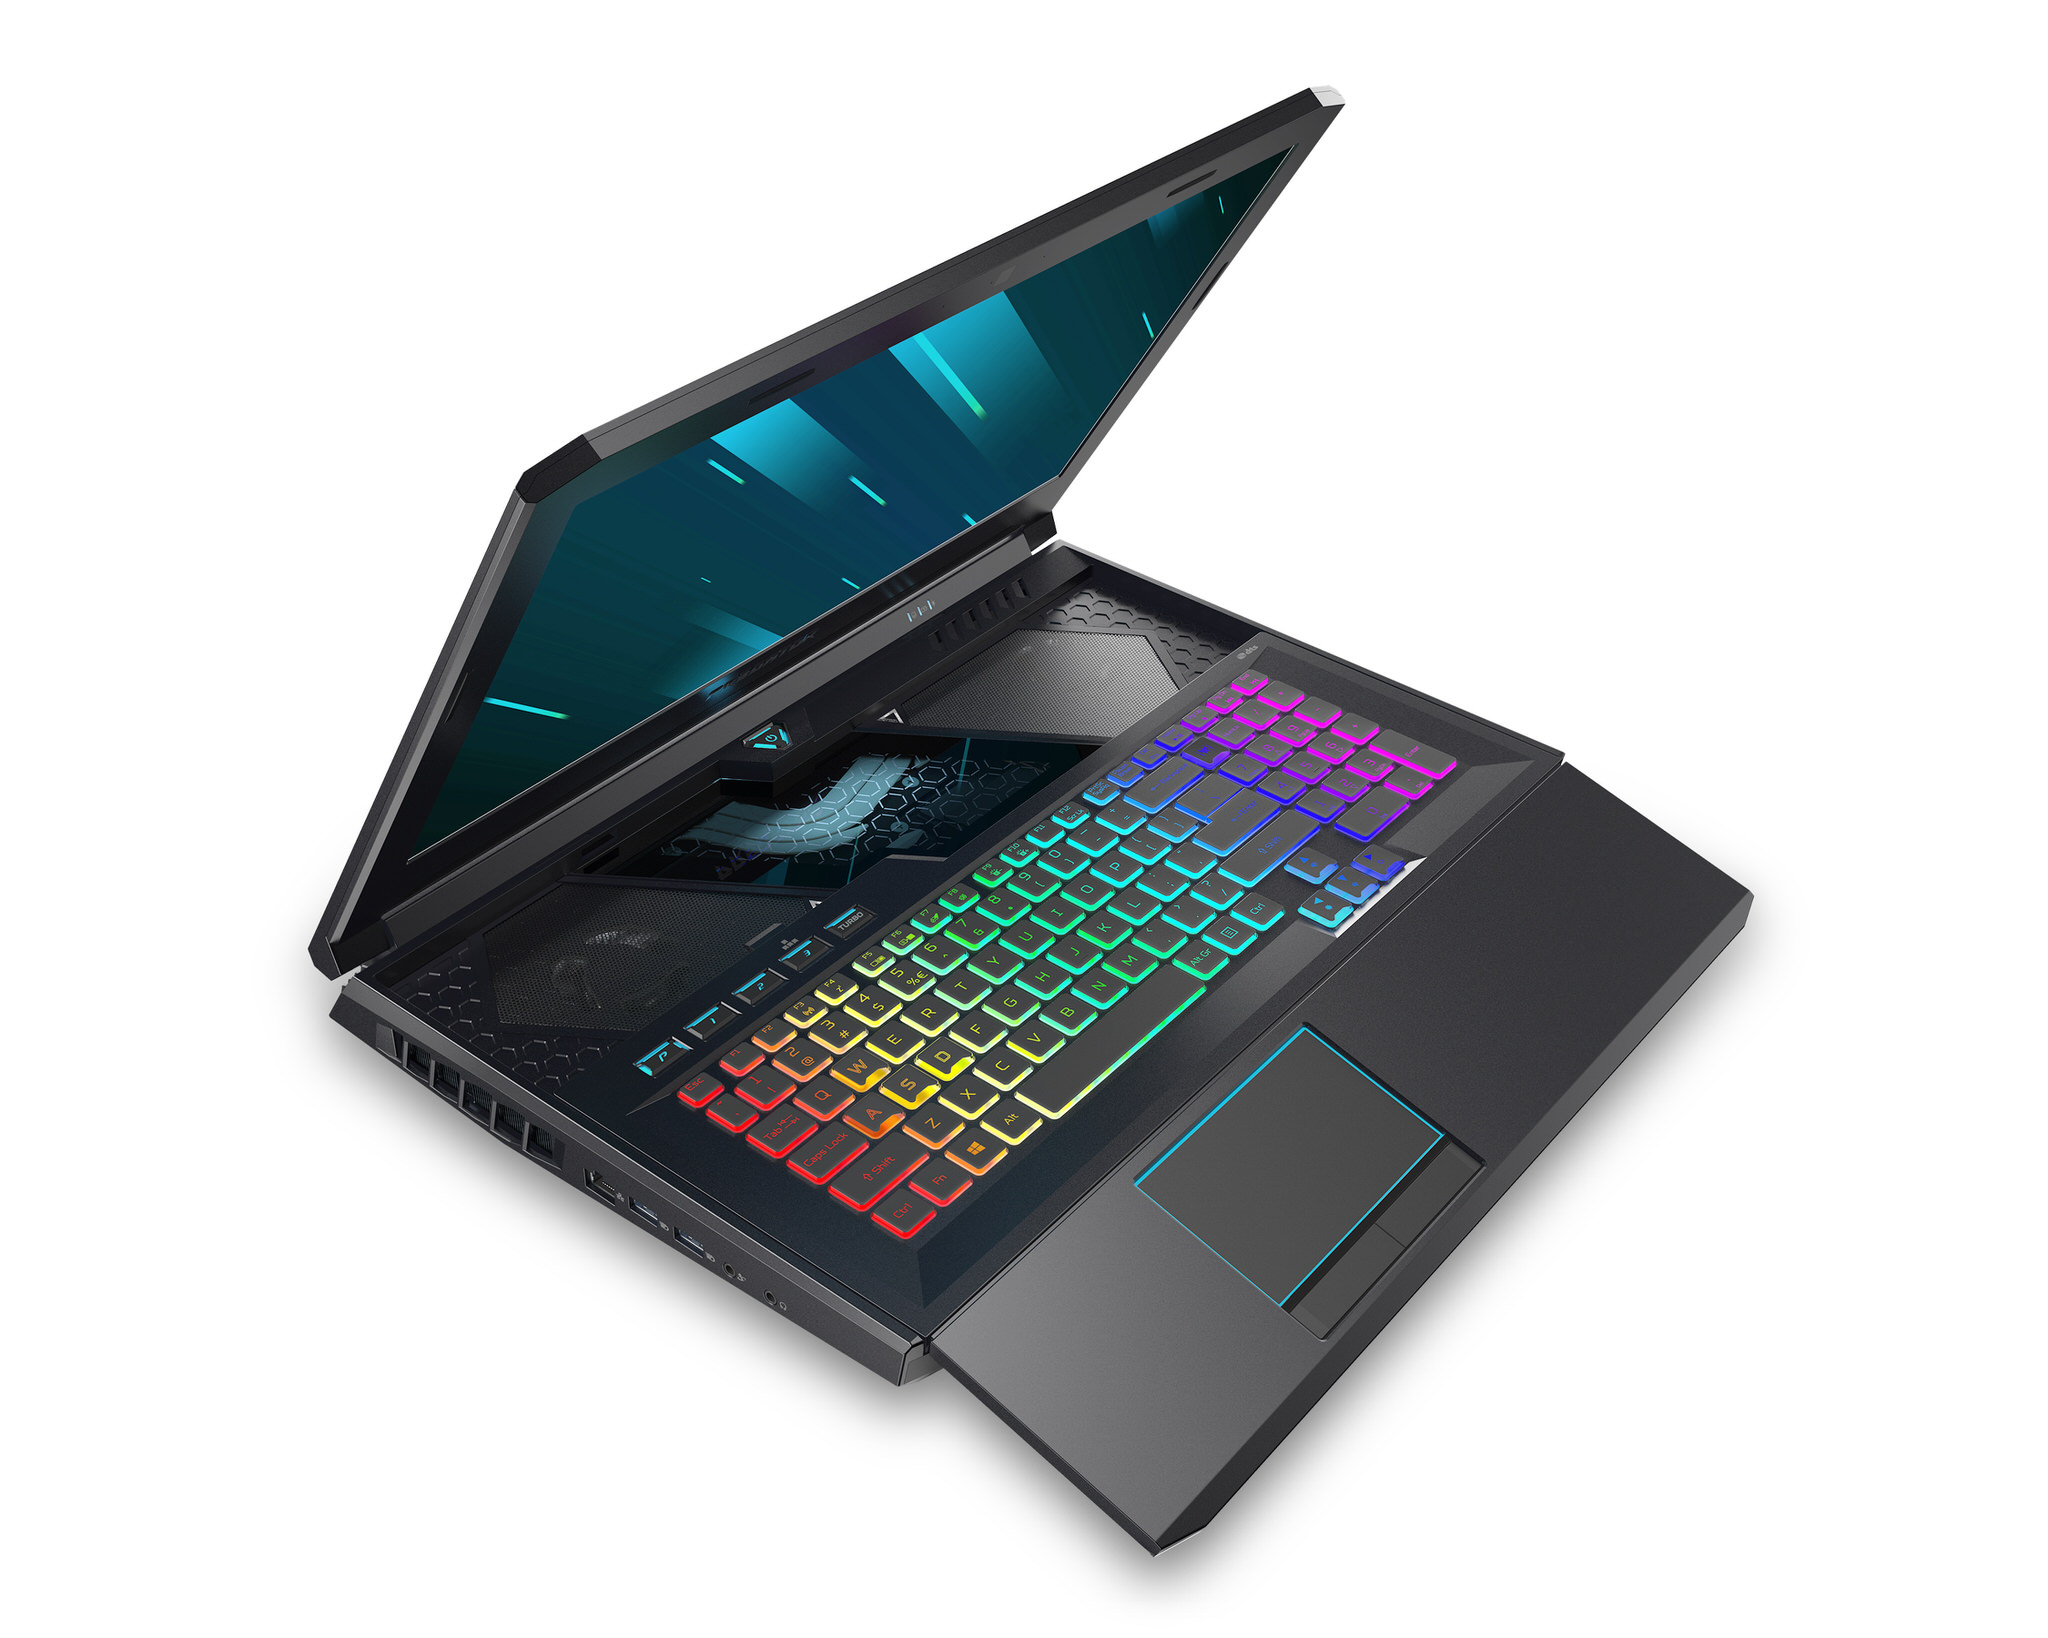 Acer Upgrades The Generation Of Gaming Laptops Predator Helios